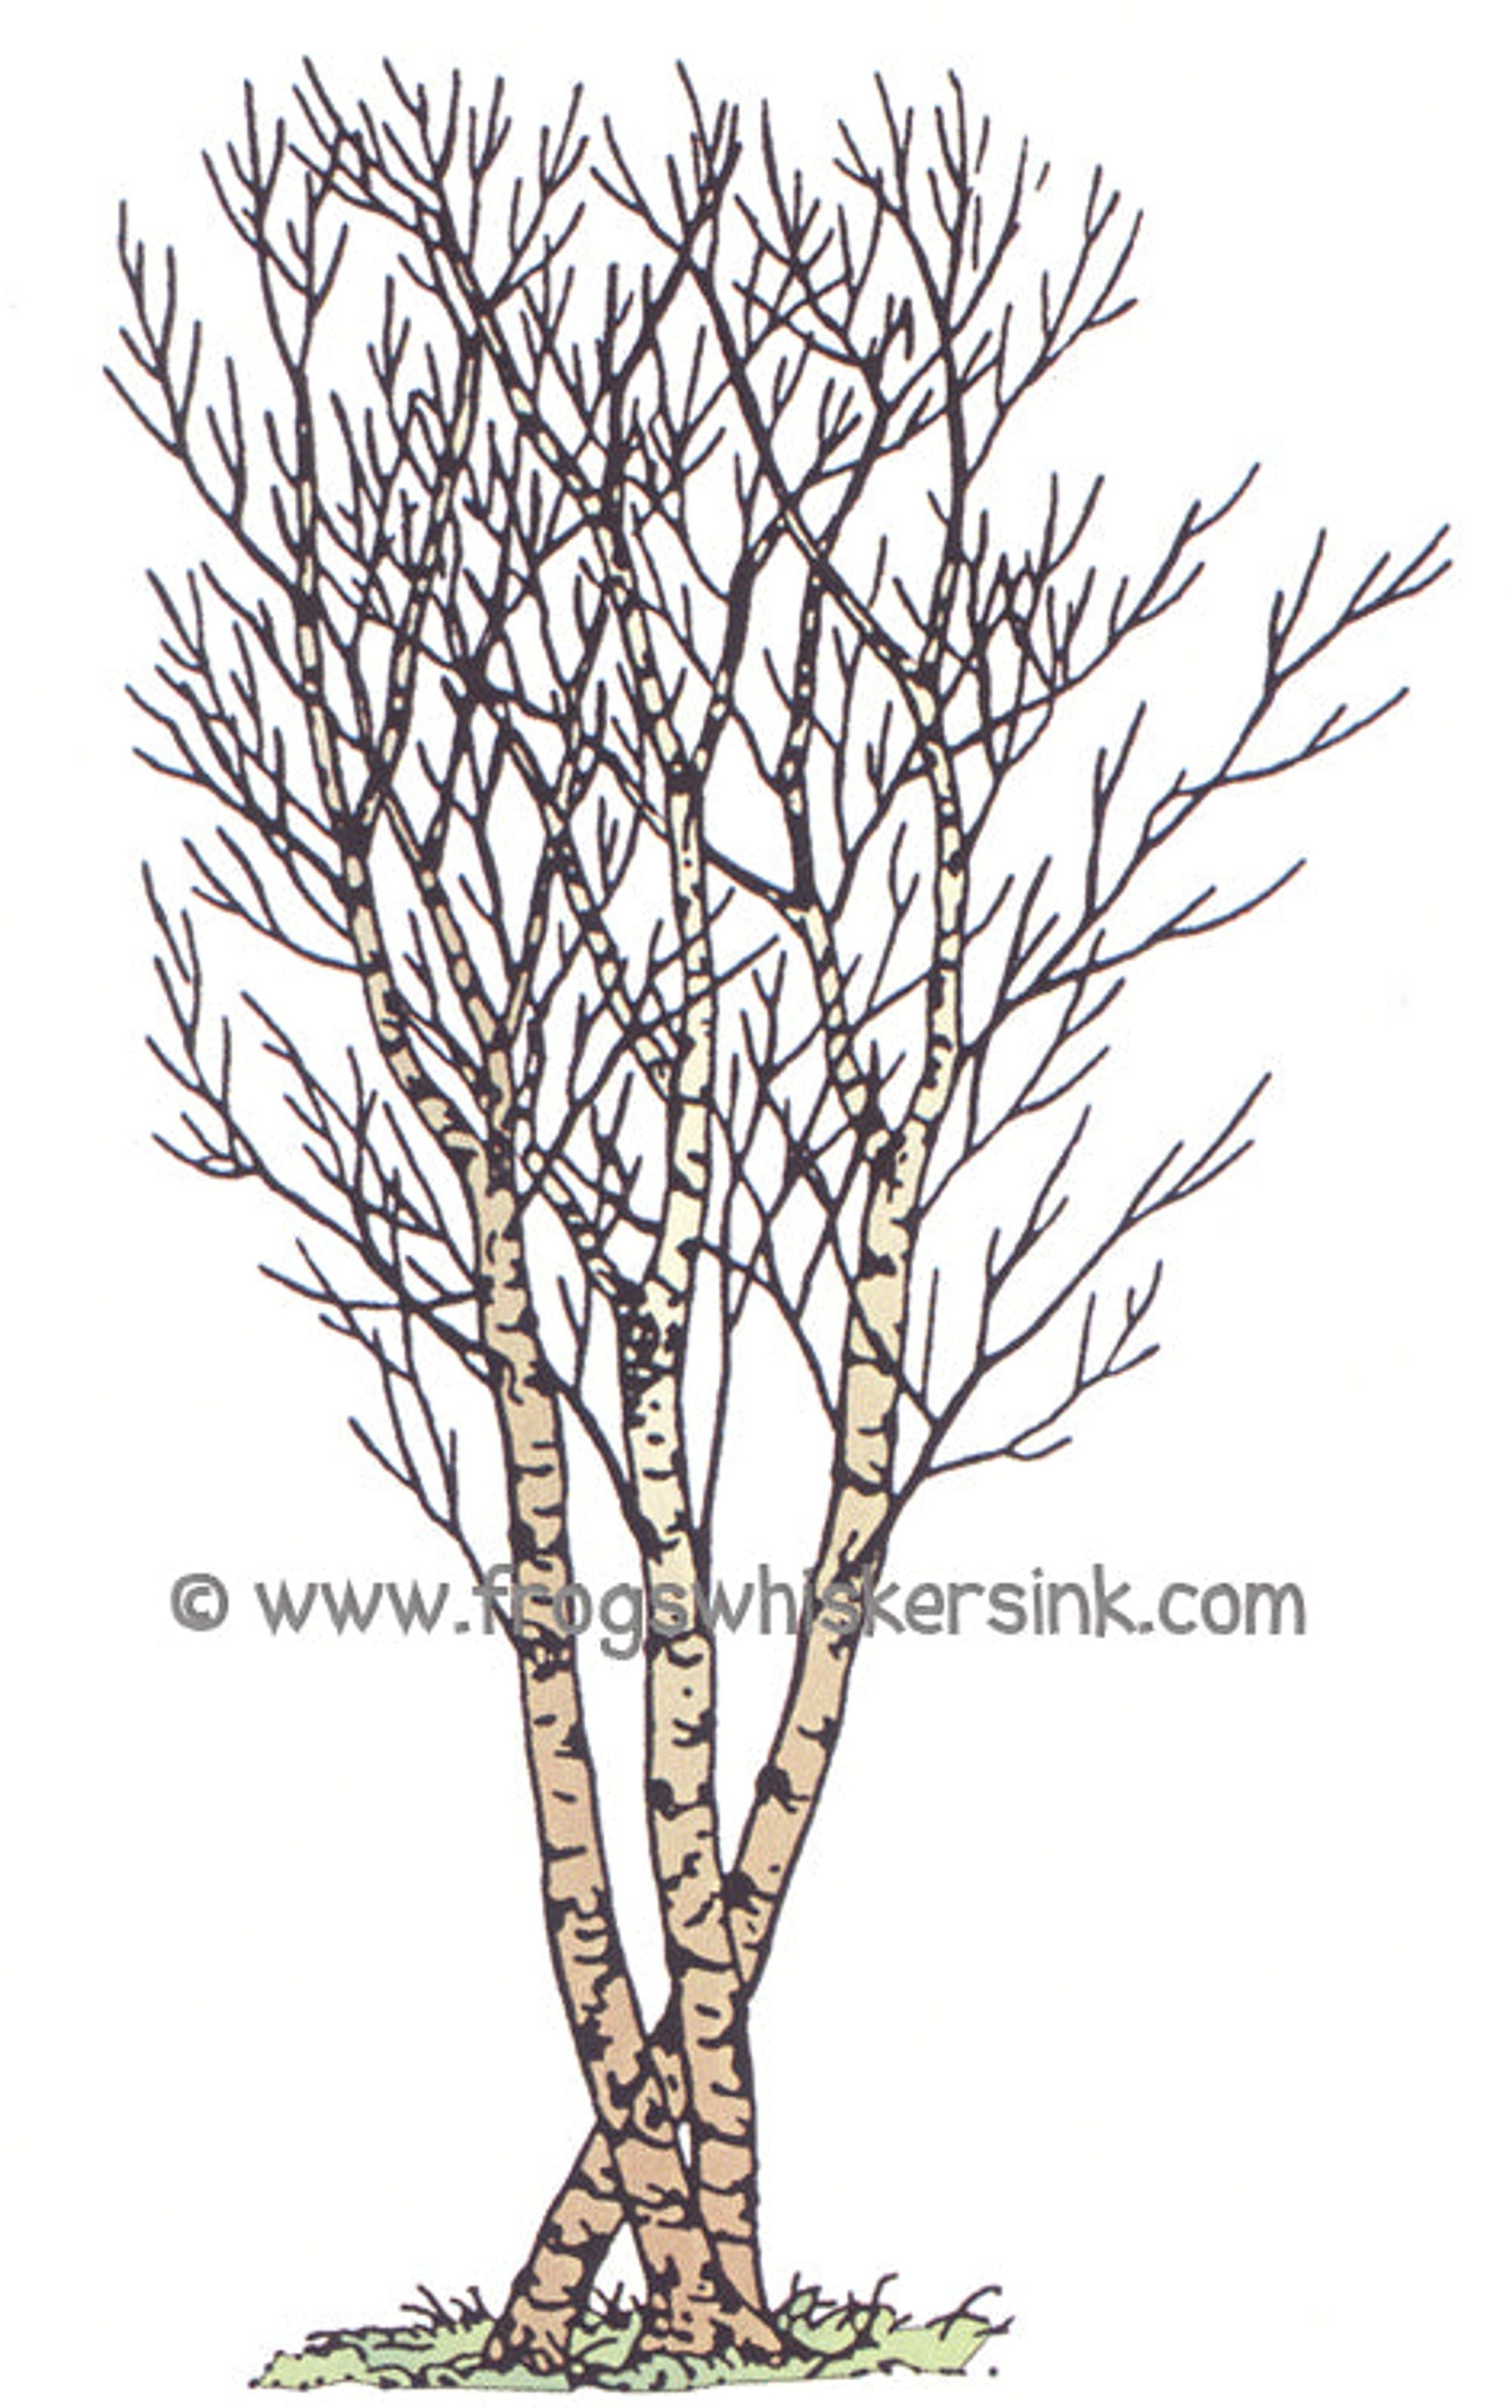 Frog's Whiskers Ink Stamps-Birch Grove Lg. Cling Mount Stamp